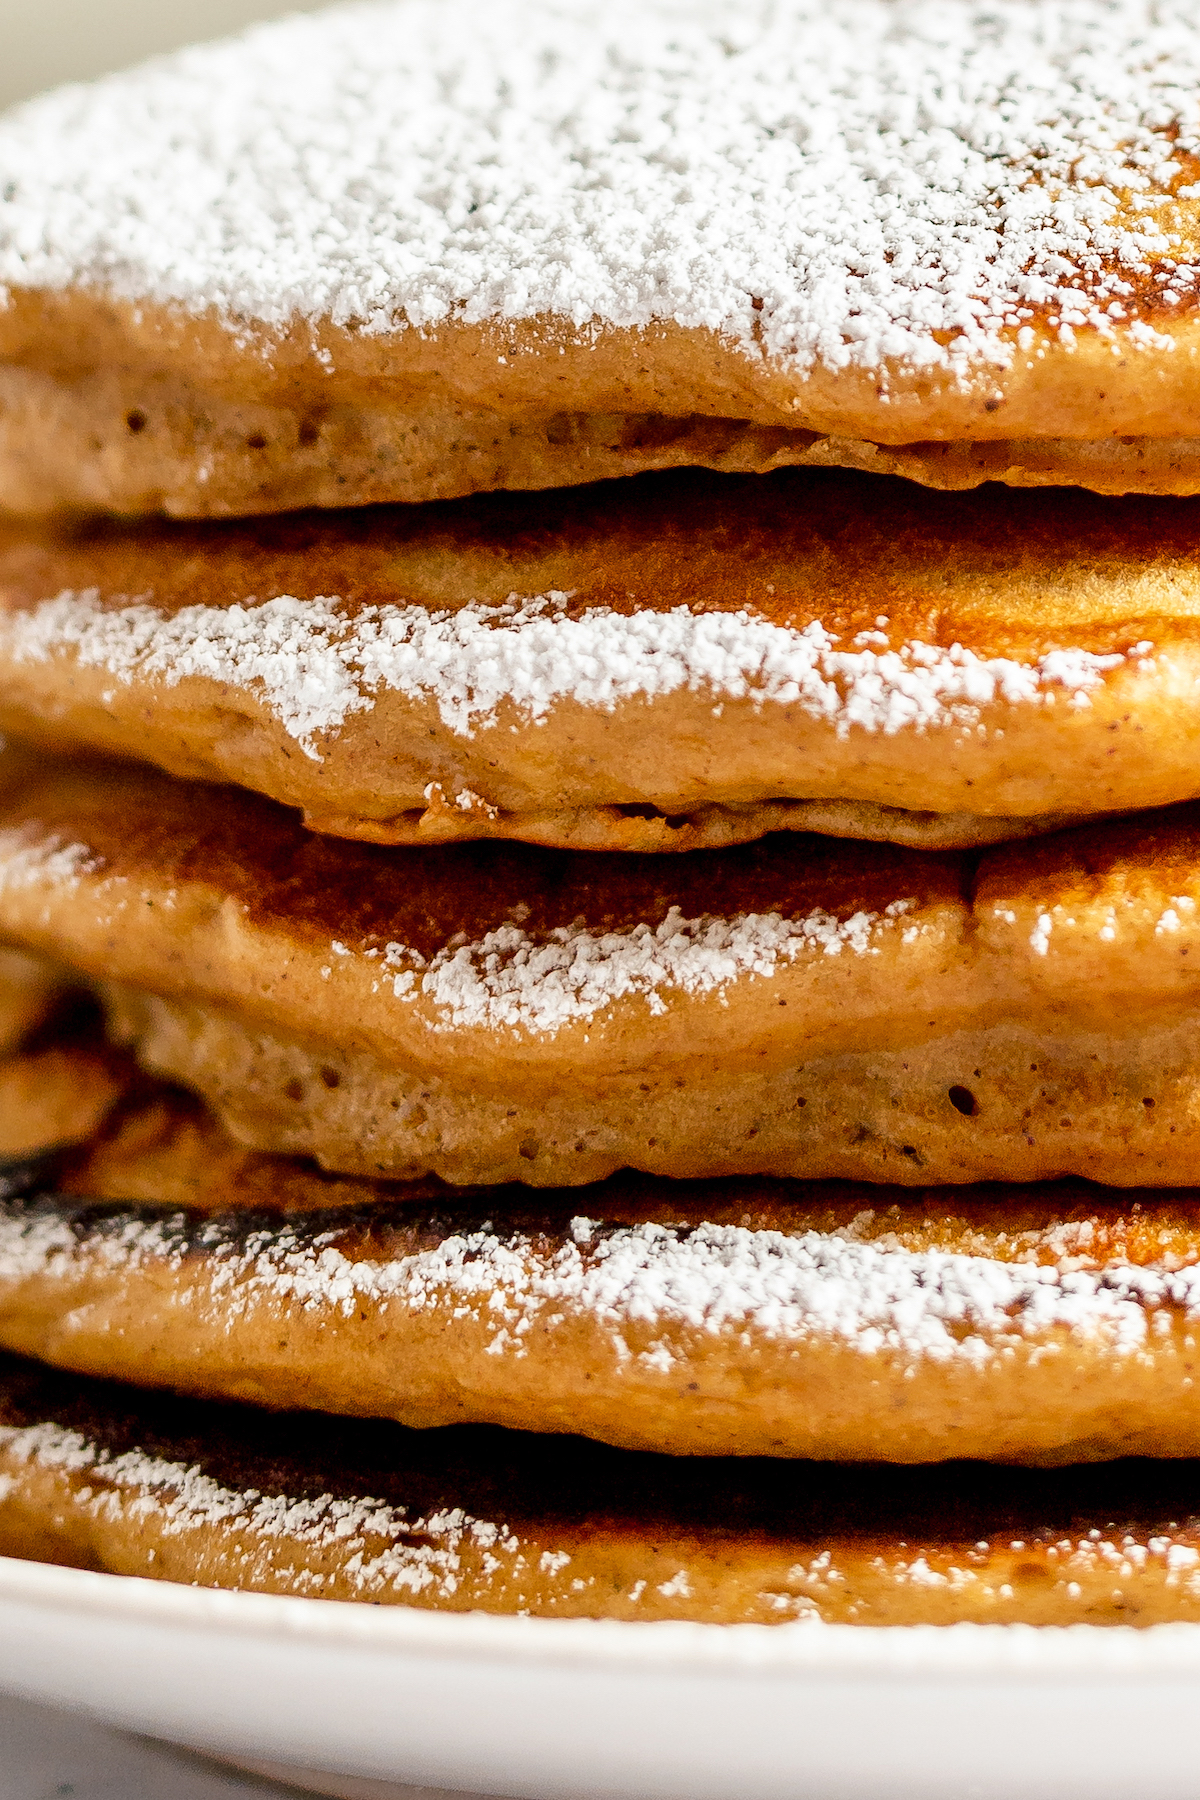 Close-up shot of pancake edges. Each cake has been dusted with powdered sugar.